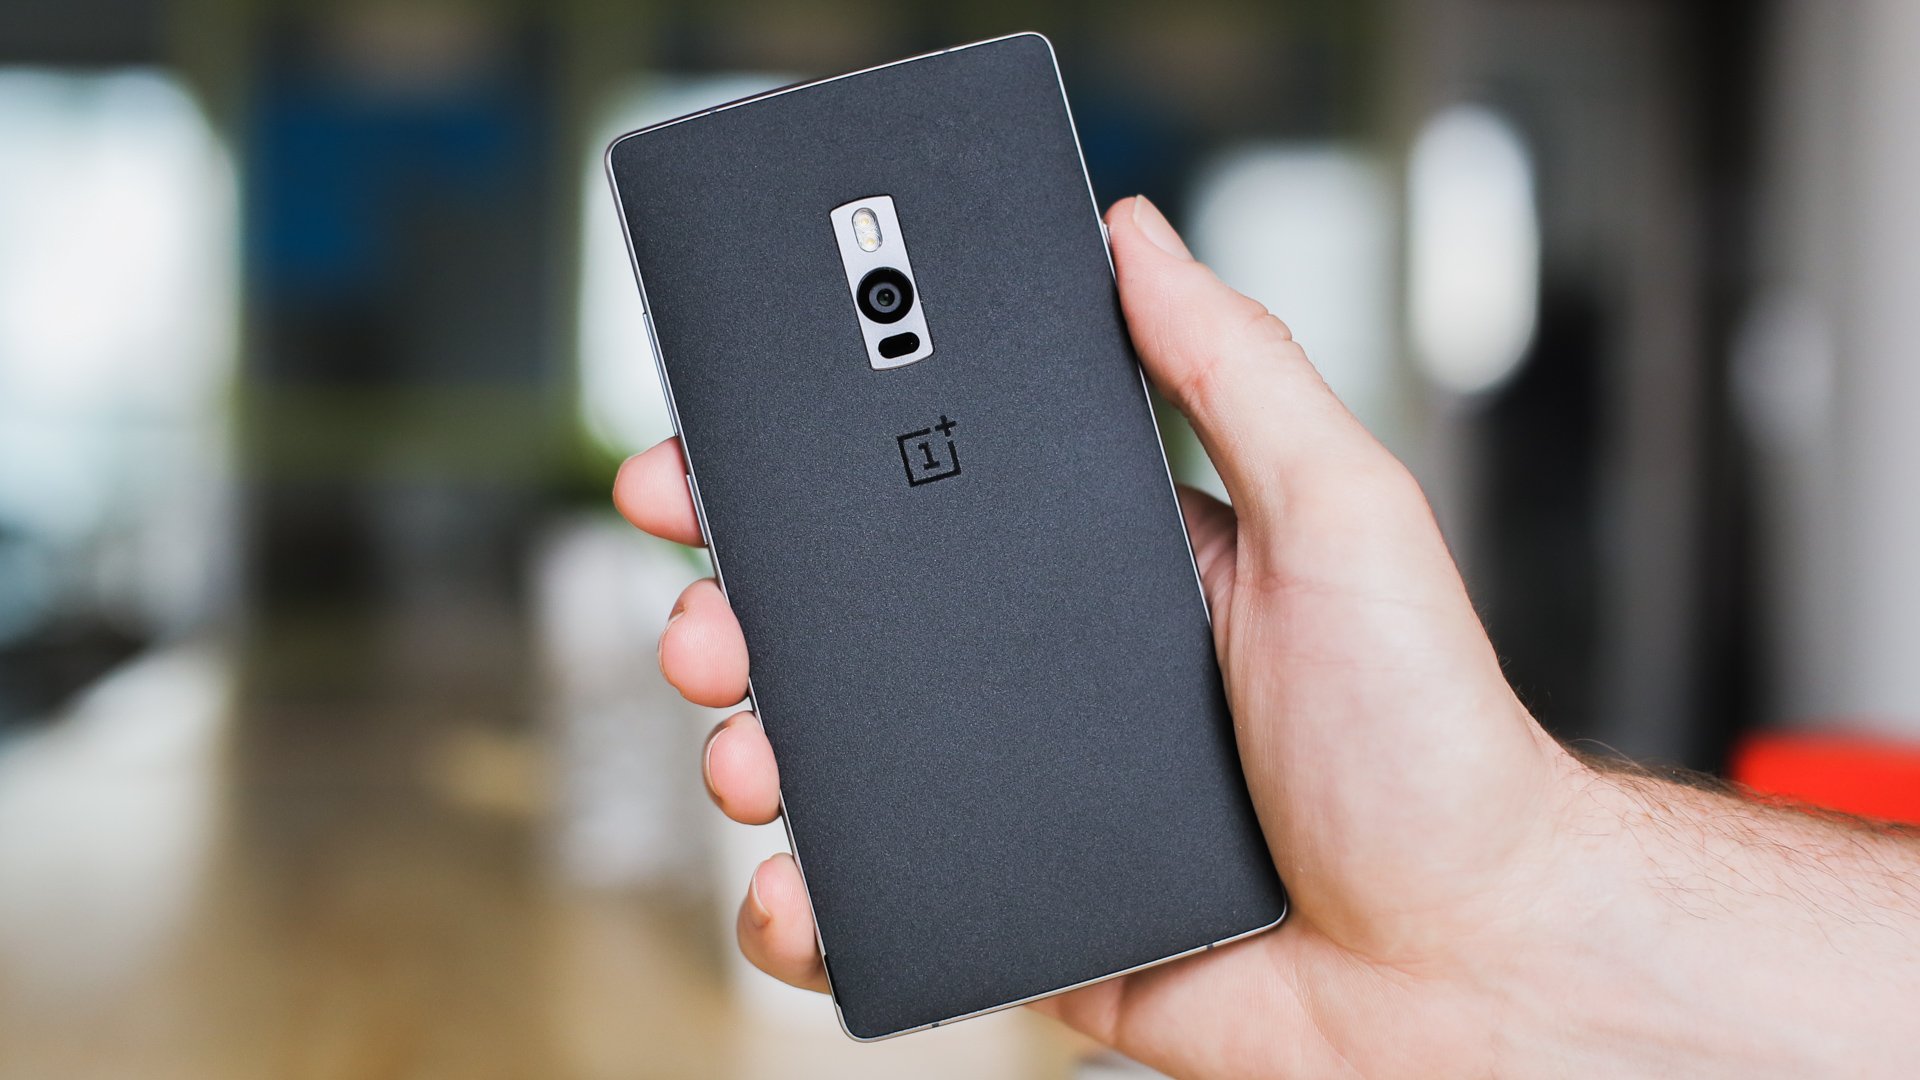 OnePlus-3-to-supposedly-launch-in-June-this-year